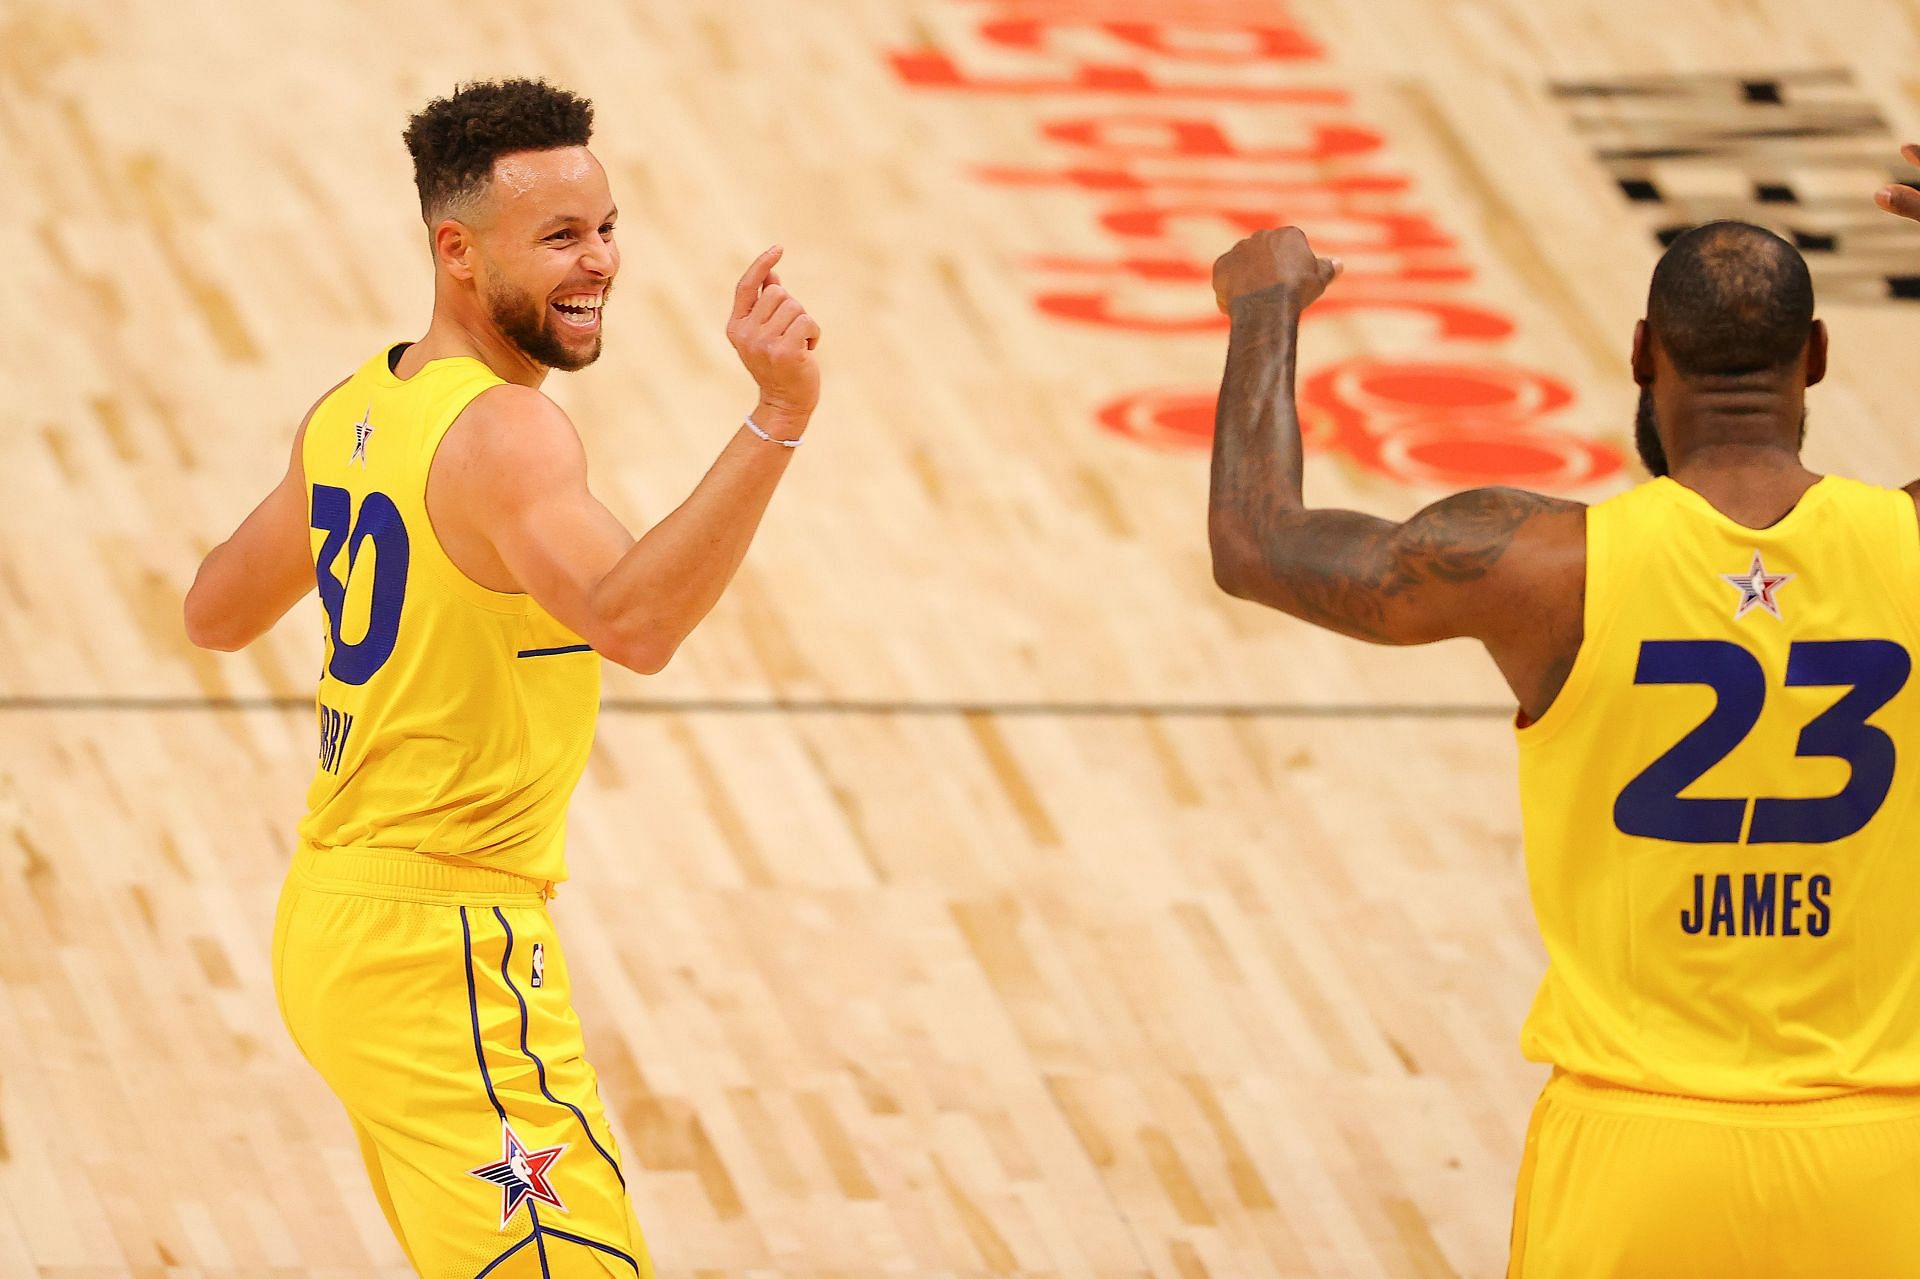 LeBron James was among the earliest players to congratulate Steph Curry for his historic Tuesday night.